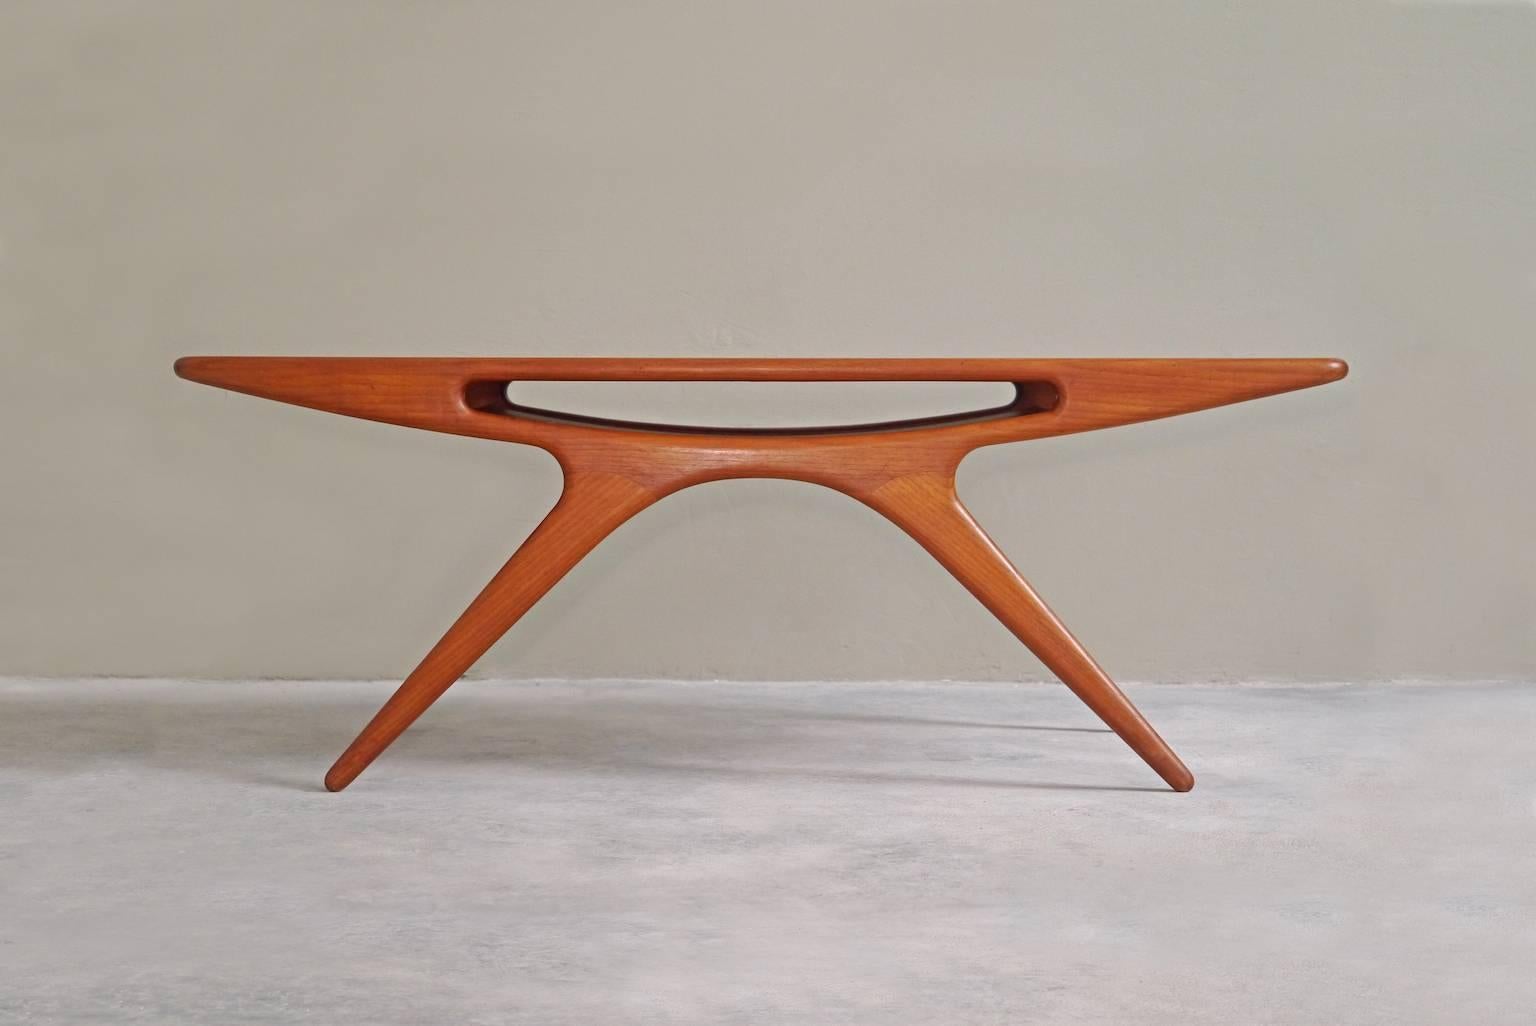 Surely Johannes Andersen's most collectible and rare design, the ‘Smile’ coffee table succeeds as being functional as well as playful and elegant. It has a solid teak body with a center pocket shelf.